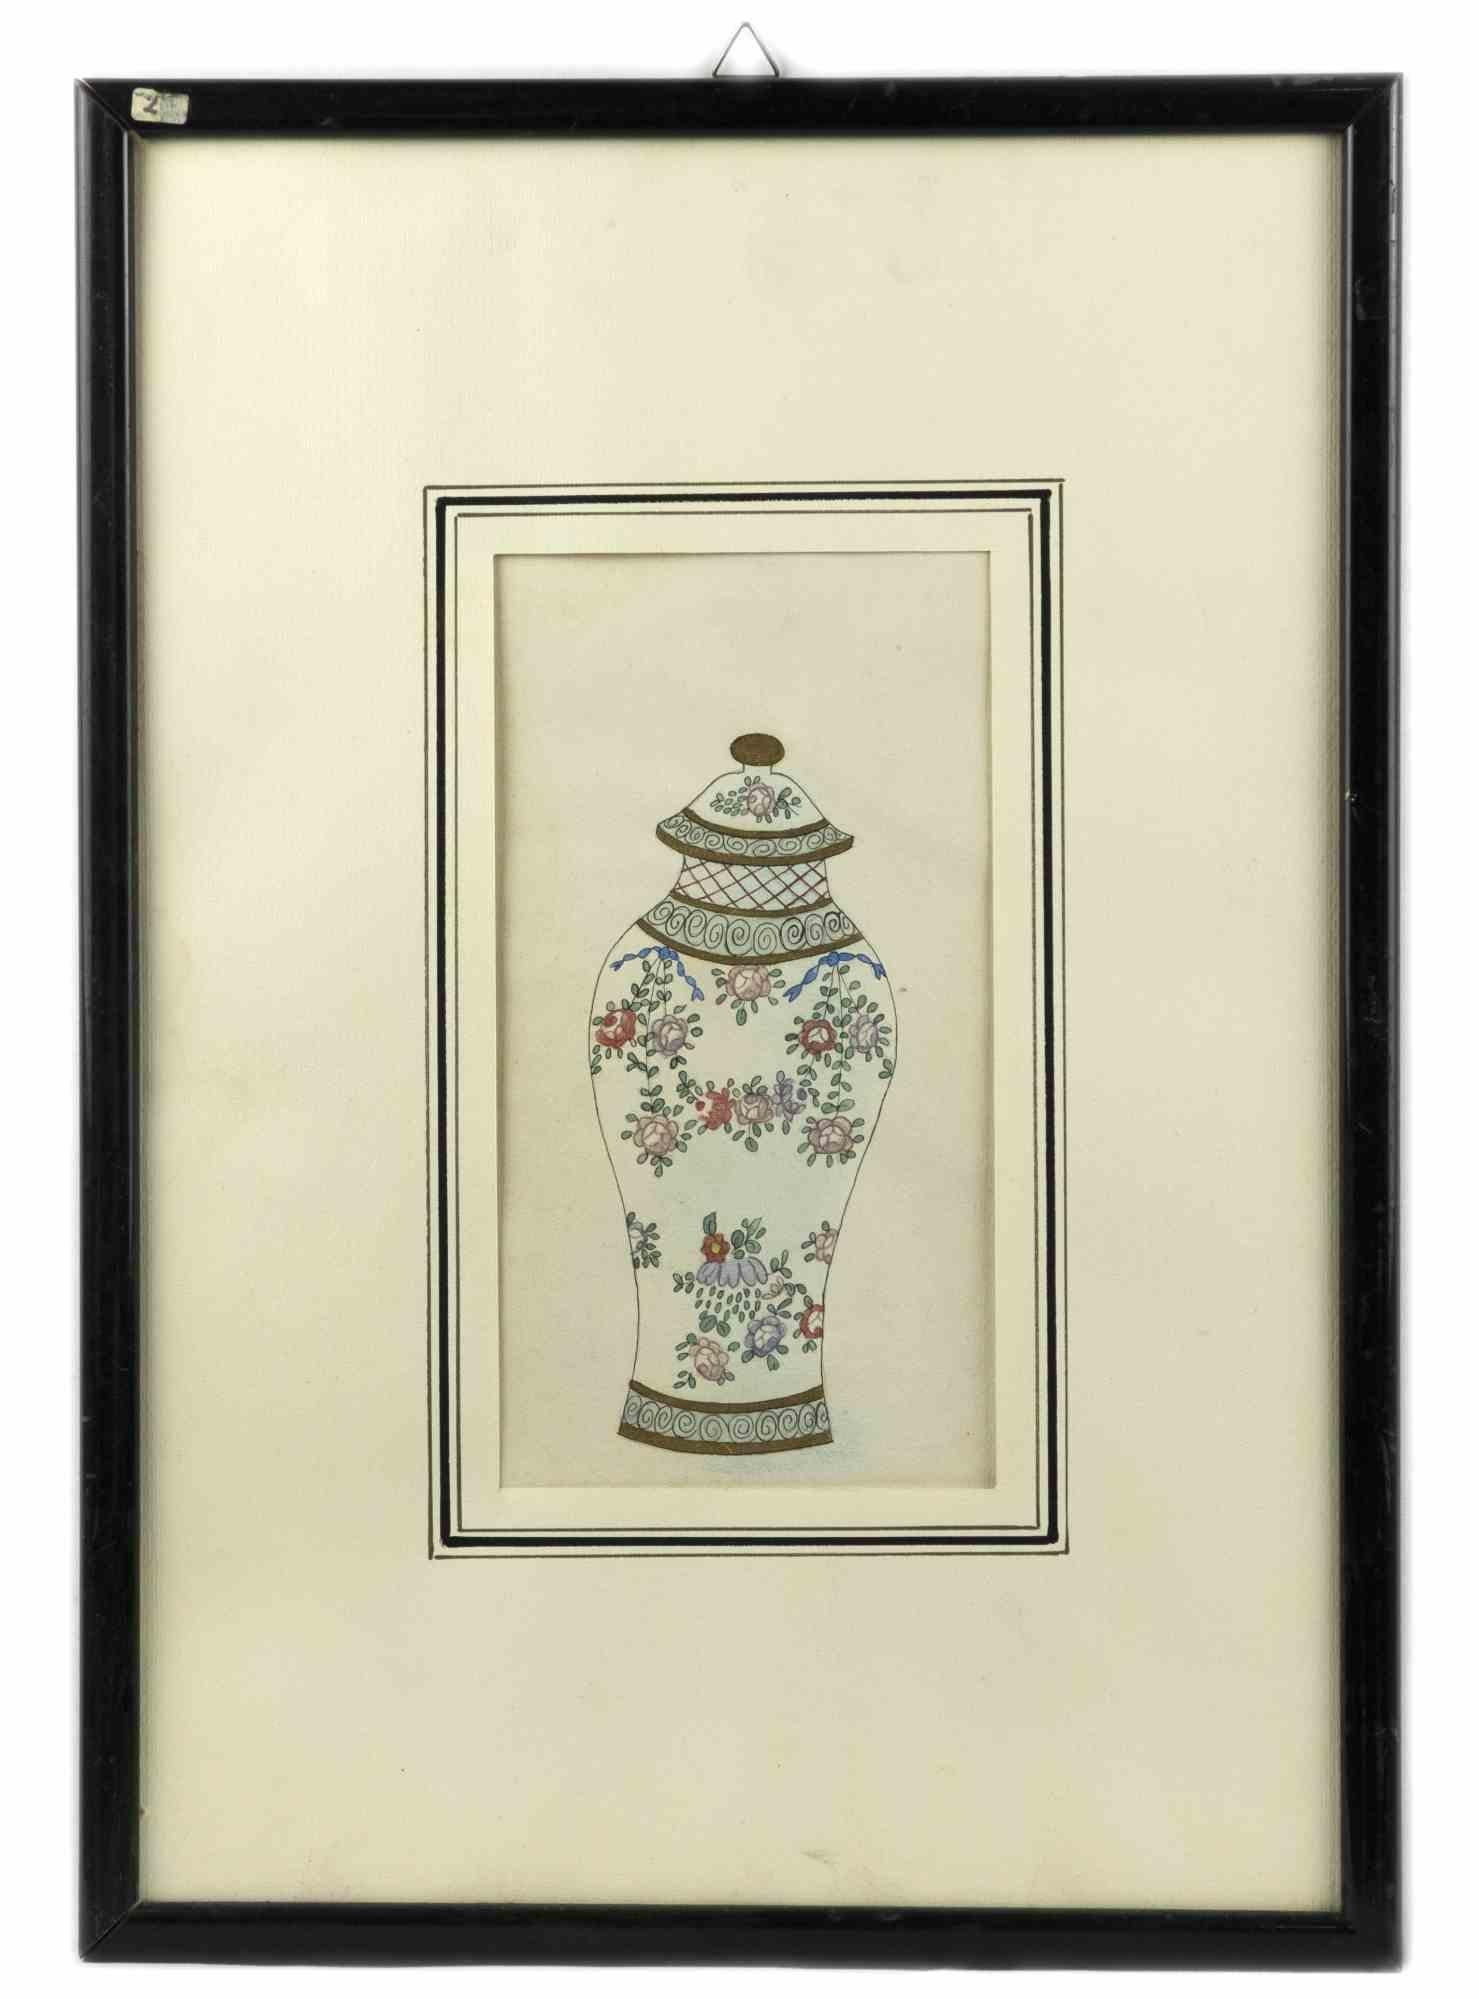 Flower Vase - Original Drawing -  Late 19th Century  - Art by Unknown